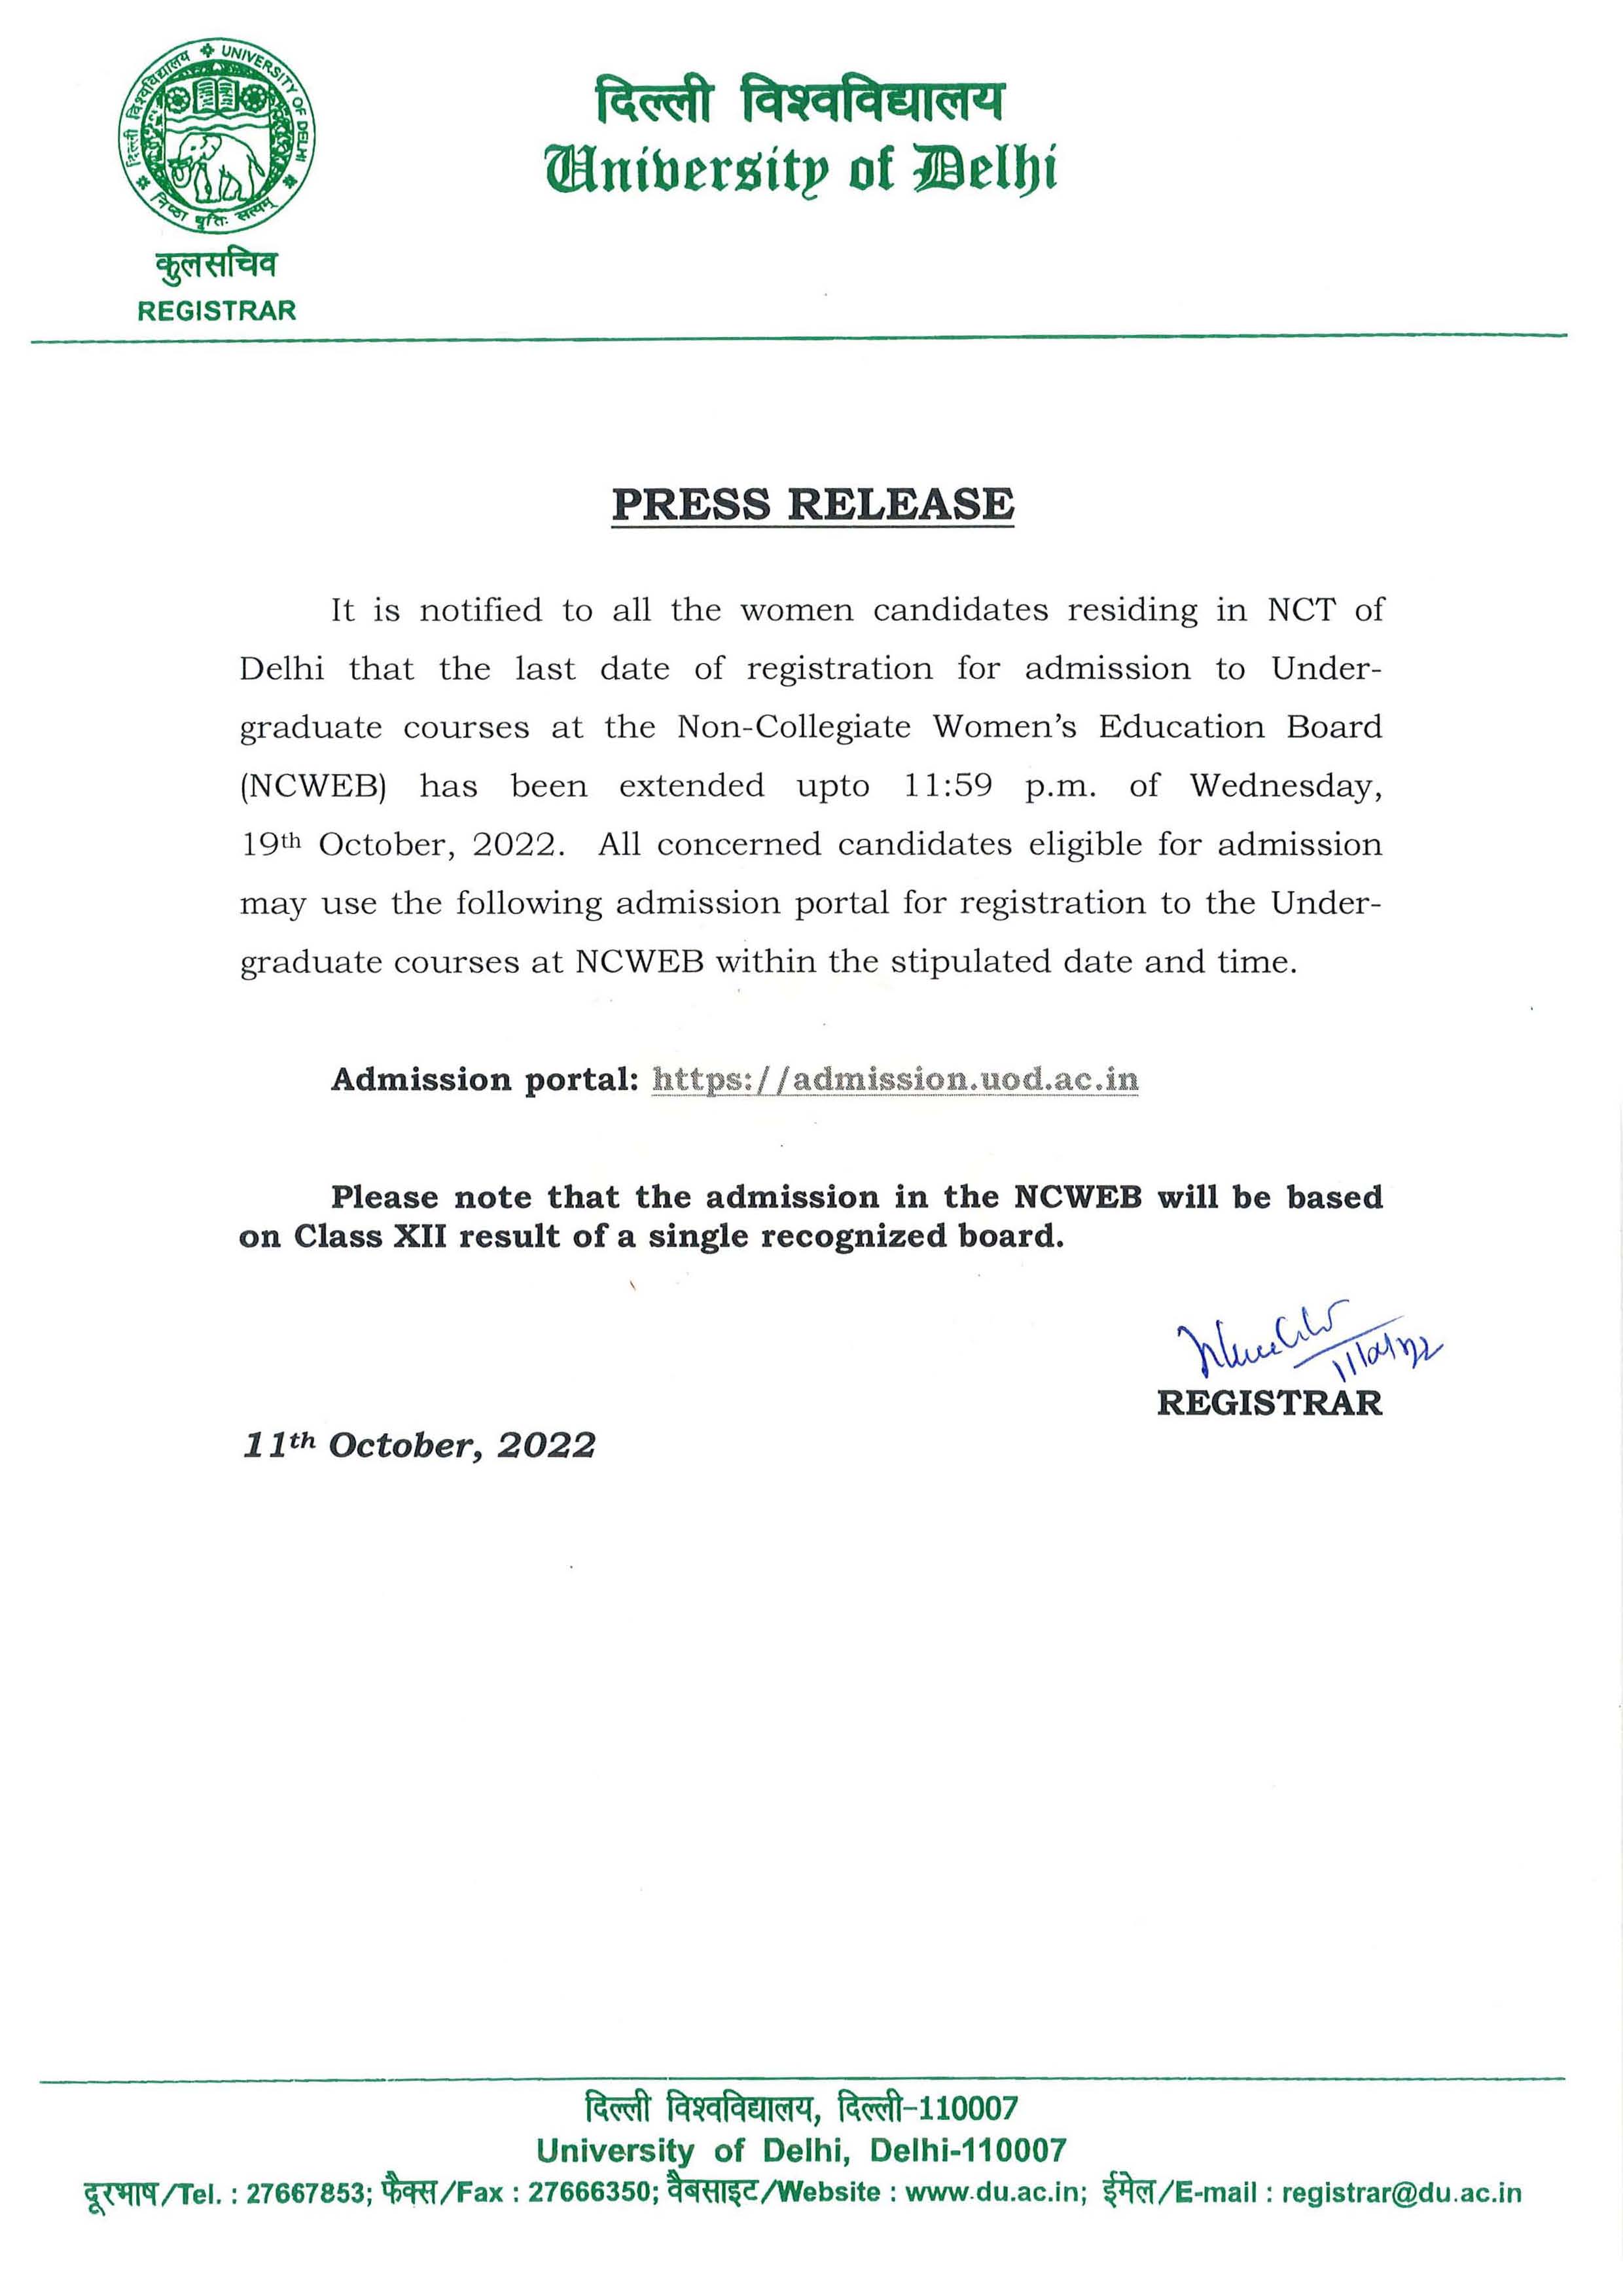 11-10-2022-Press Release - Extension of Last date for UG Admission - NCWEB, DU